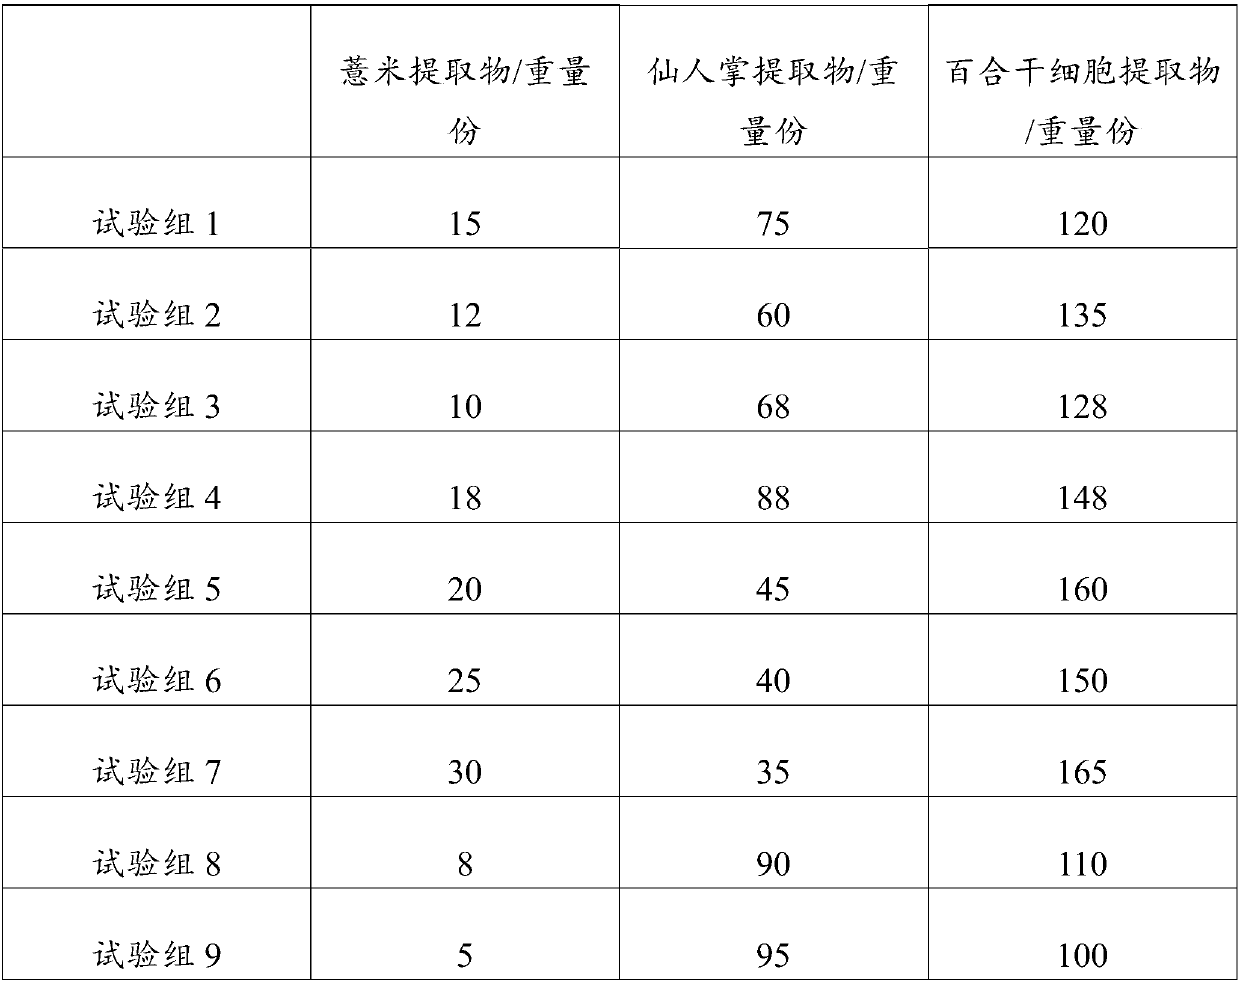 Anti-aging composition containing lily bulb stem cell extract and application of anti-aging composition in skin-care products